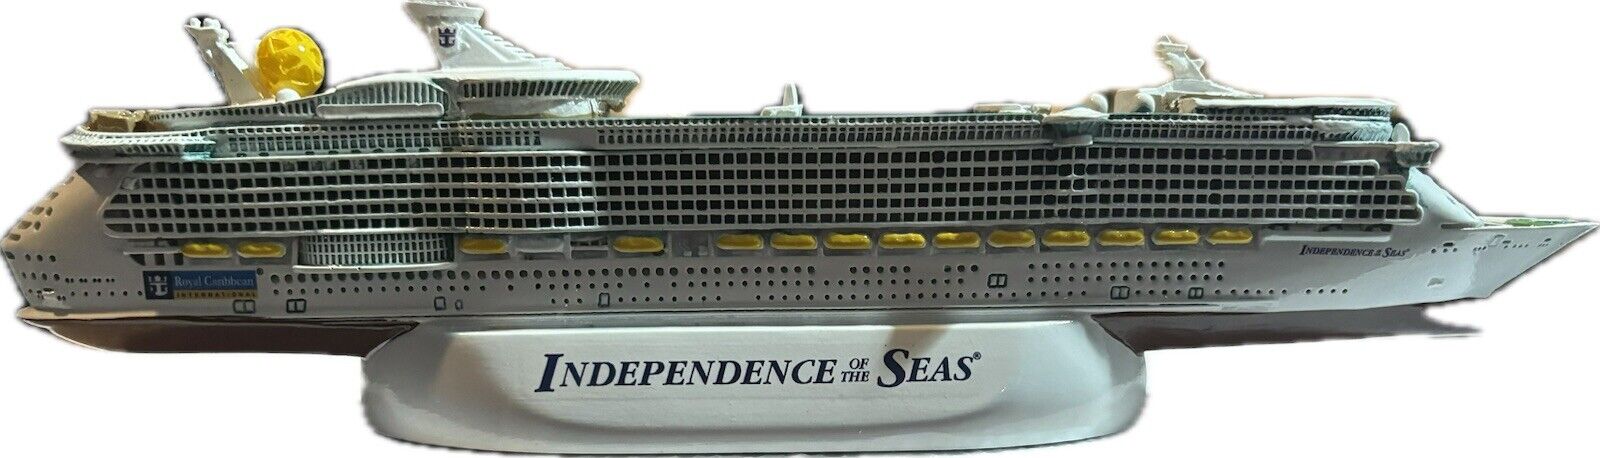 royal caribbean.  Independence Of The Seas.  Model Ship